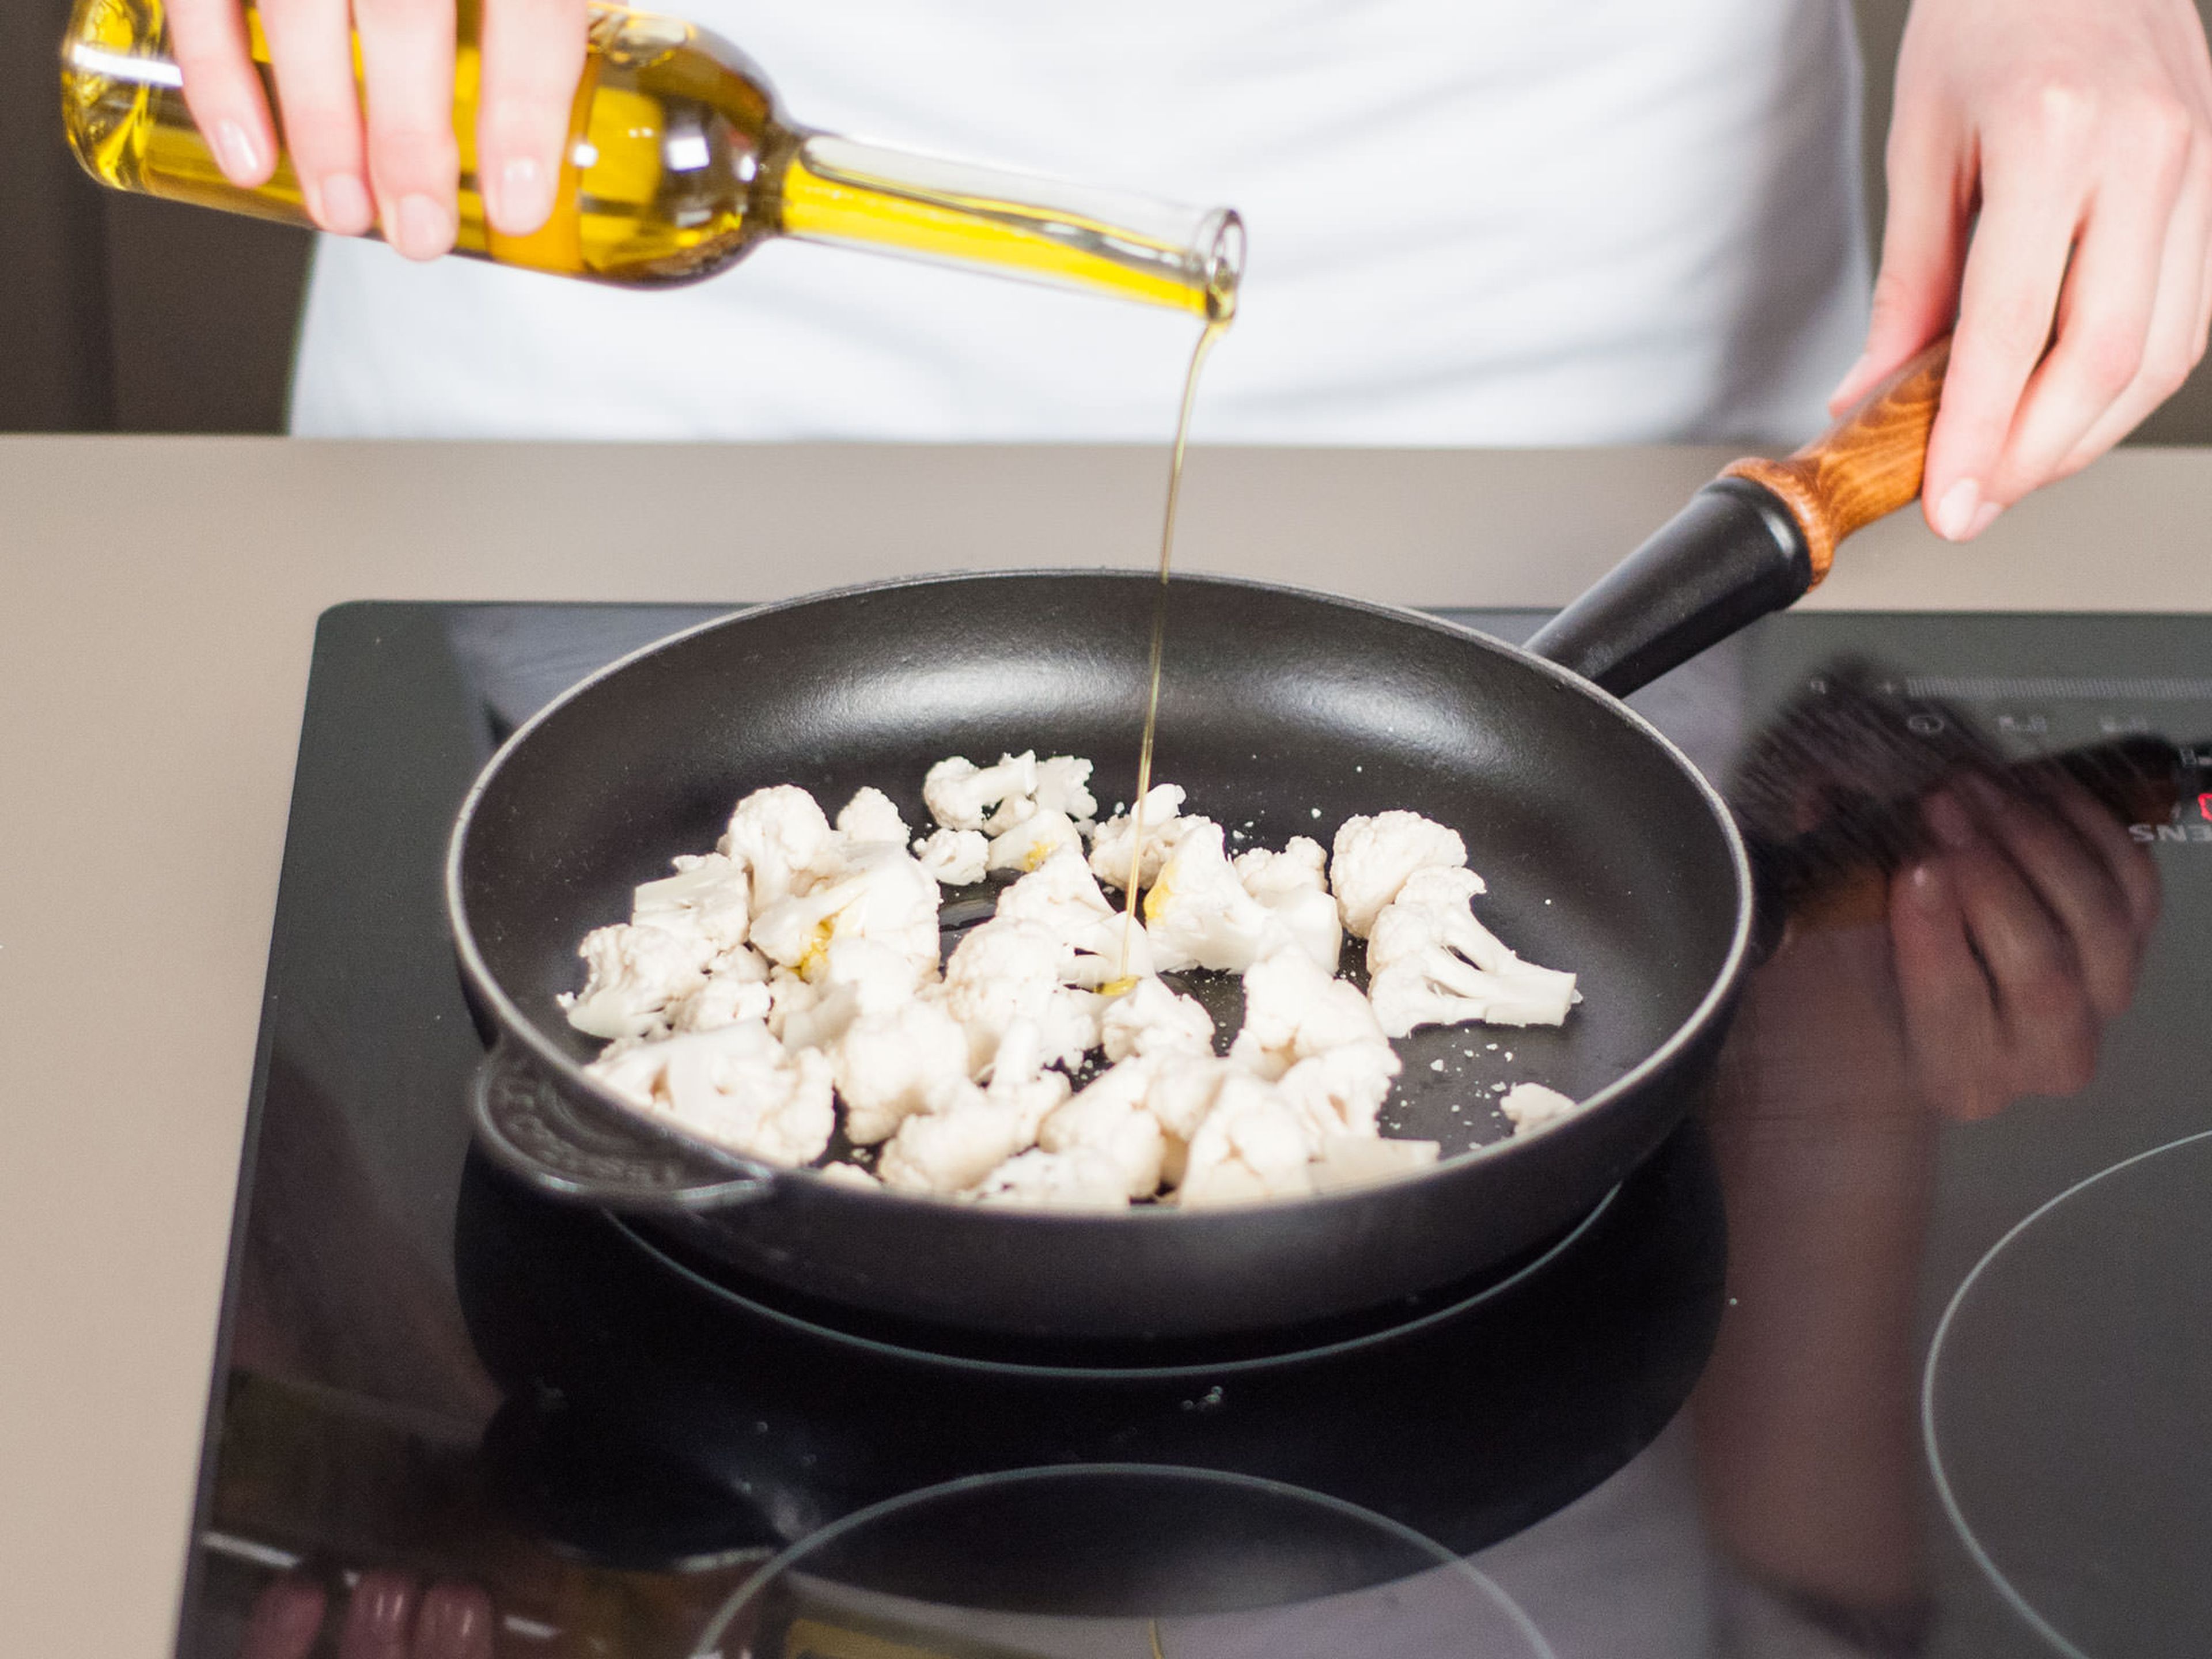 Add cauliflower to an ovenproof frying pan. Add olive oil and season with salt and pepper. Bake in the oven at 180°C/ 350°F for approx. 10 min. Then remove from oven and set aside to cool.